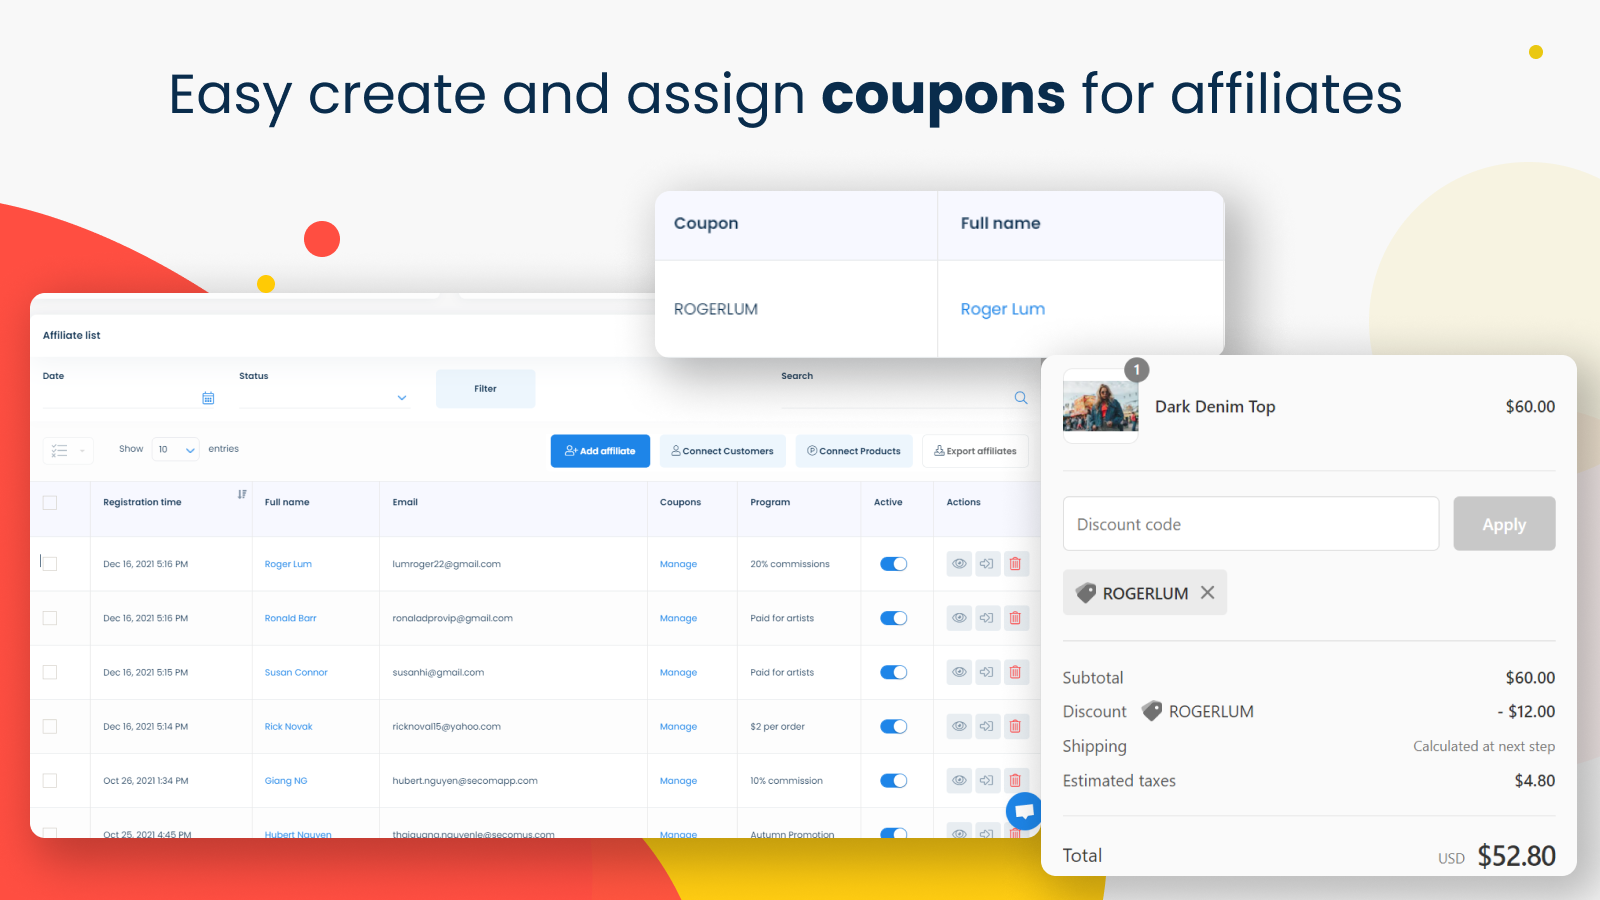 Easy create and assign coupons for affiliates